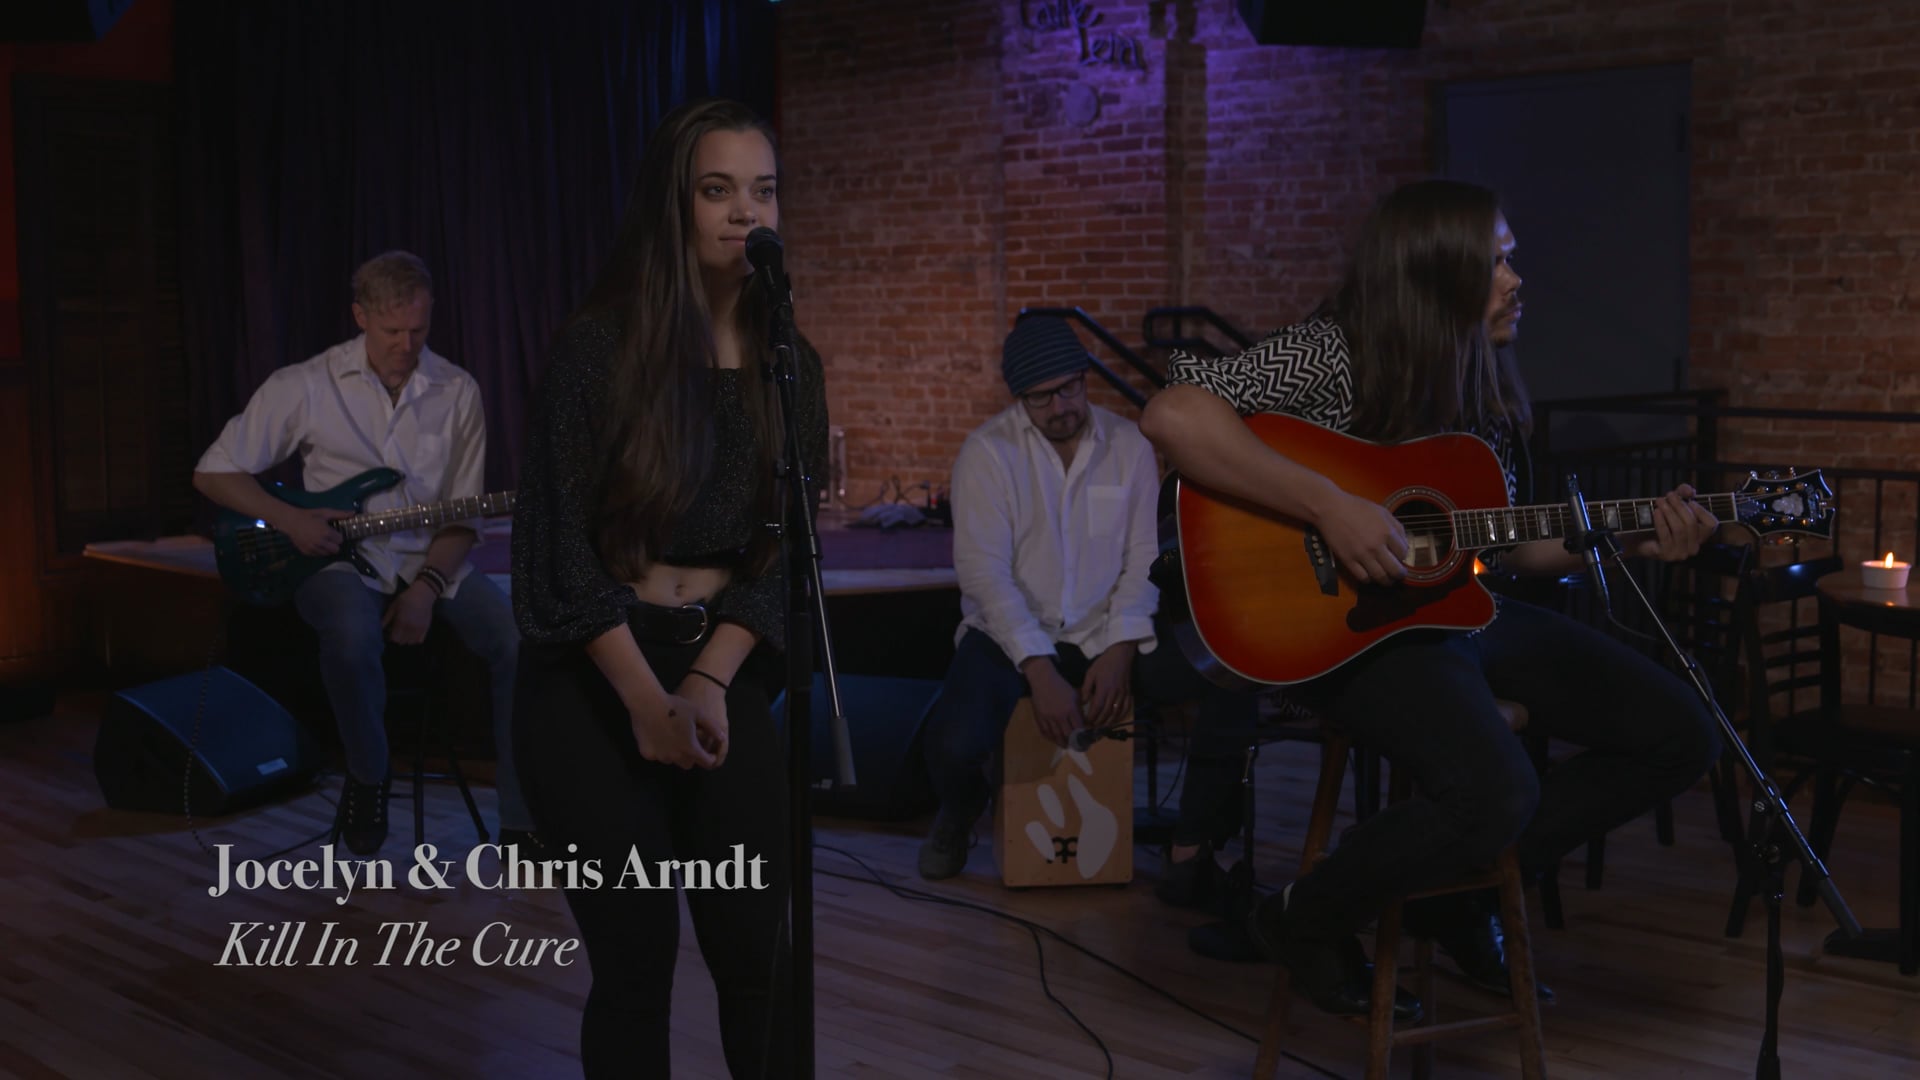 Kill In The Cure - Jocelyn & Chris Arndt [Caffe Lena Late Night Sessions]